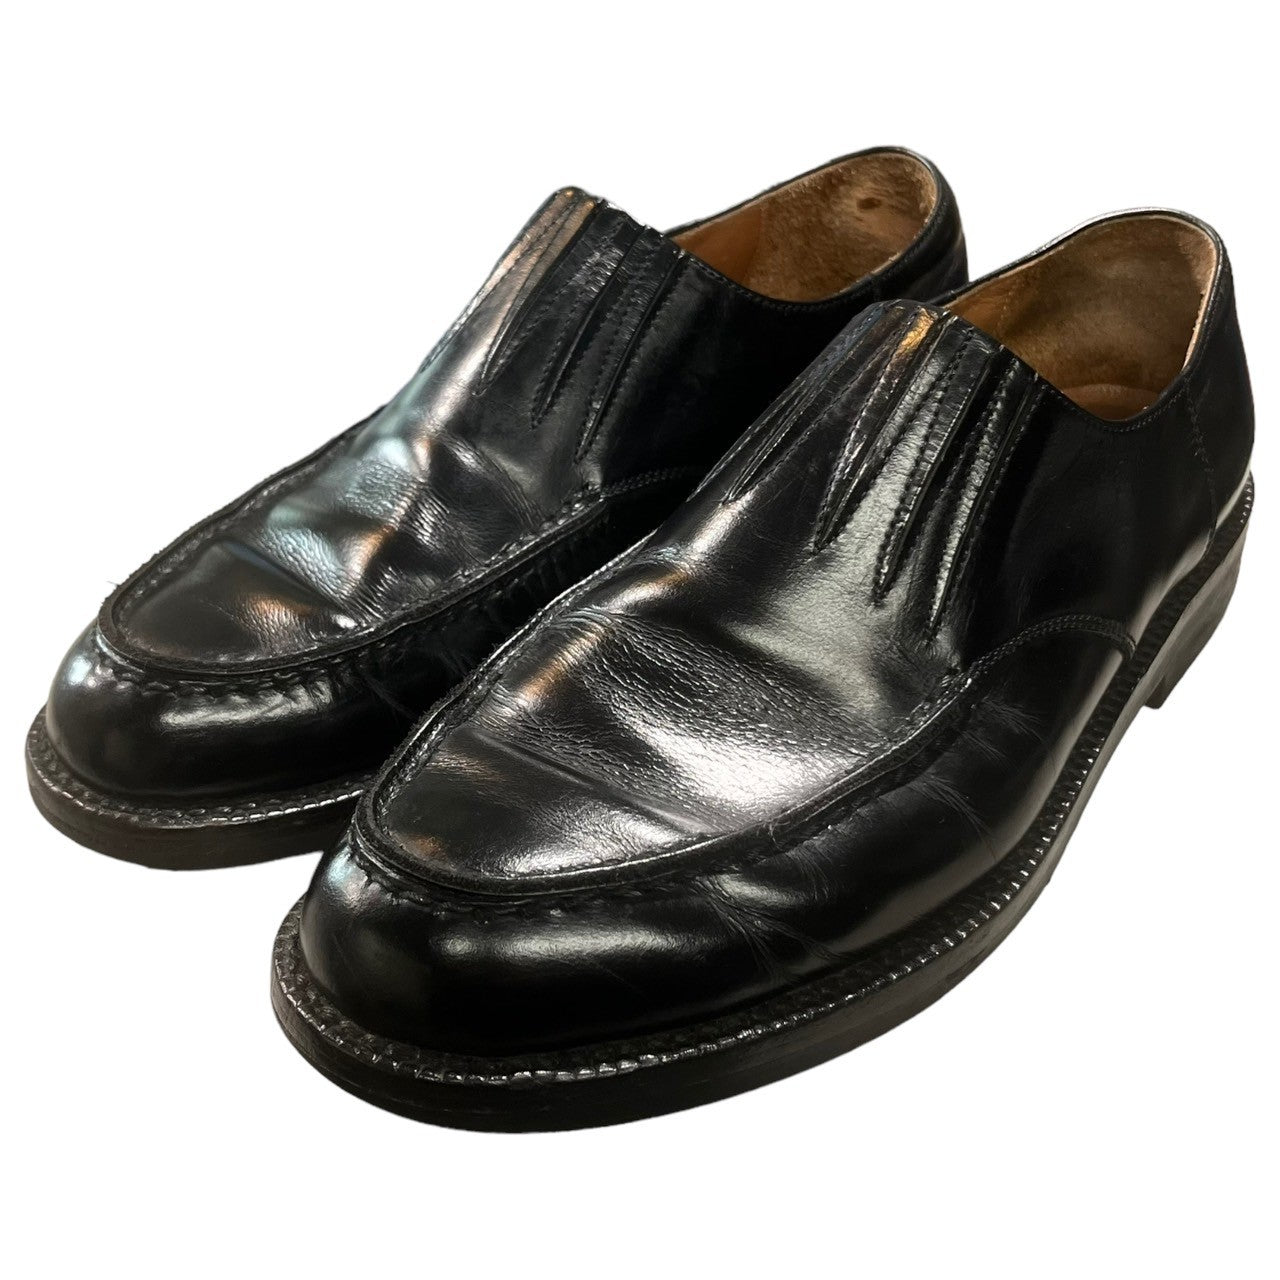 COMME des GARCONS HOMME(コムデギャルソンオム) 00s front gore leather  shoes/フロントゴアレザーシューズ/革靴 SIZE 24 1/2 ブラック 日本製